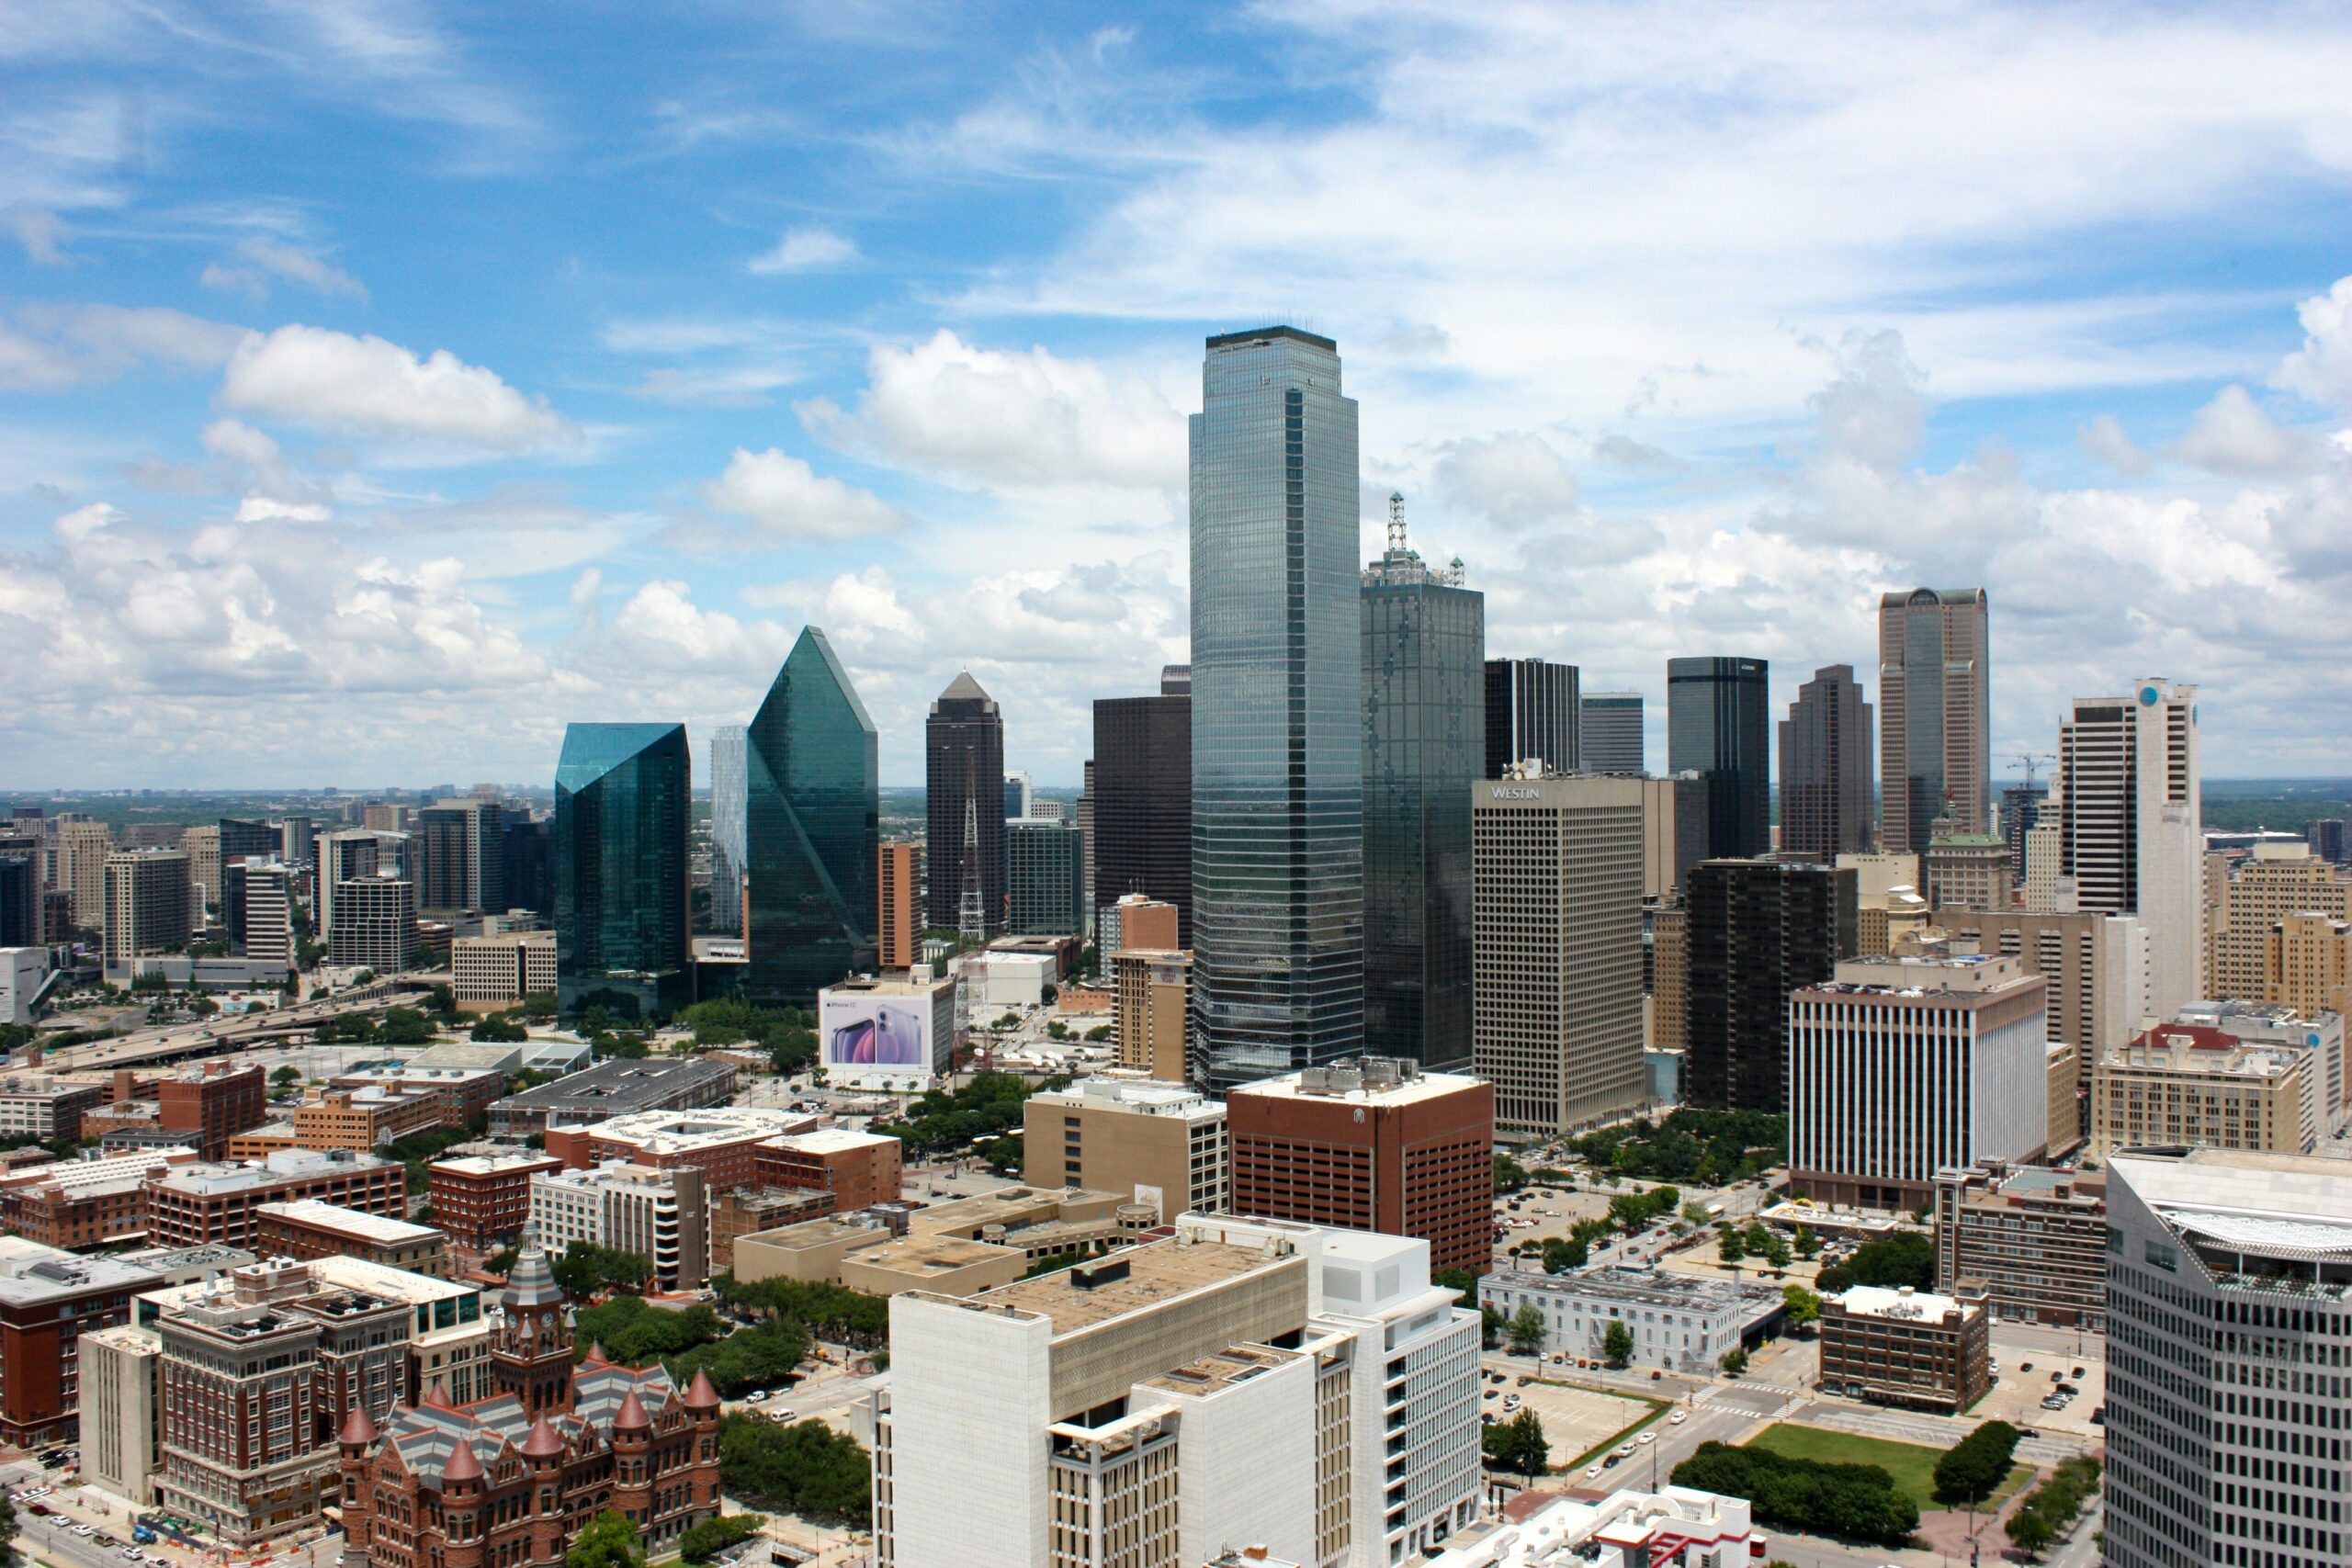 Check out the top destination for a road trip from Dallas. 
pictured: the cityscape of Dallas, Texas on a bright cloudy day 